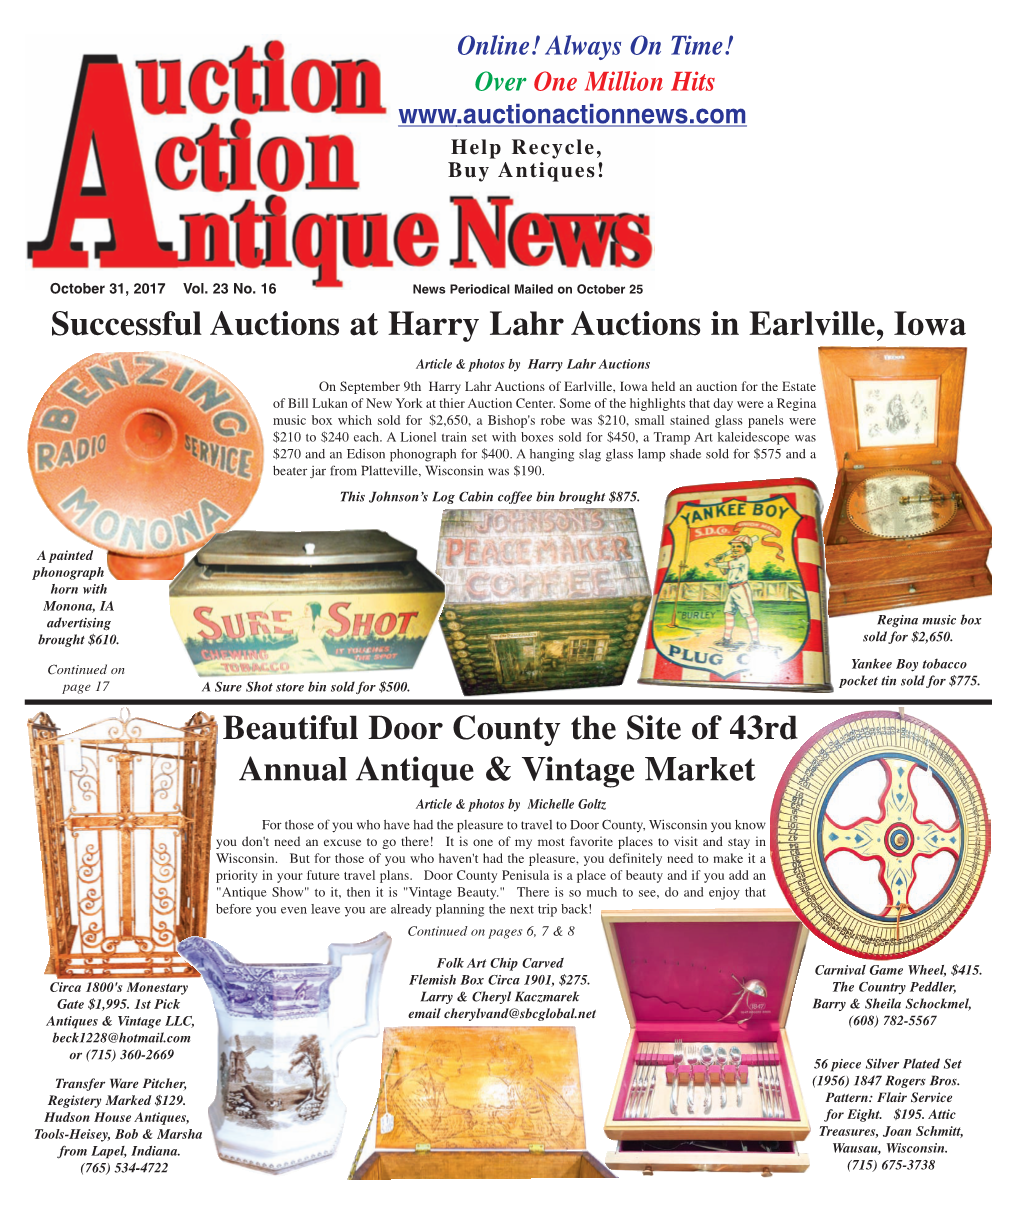 Over One Million Hits Help Recycle, Buy Antiques!